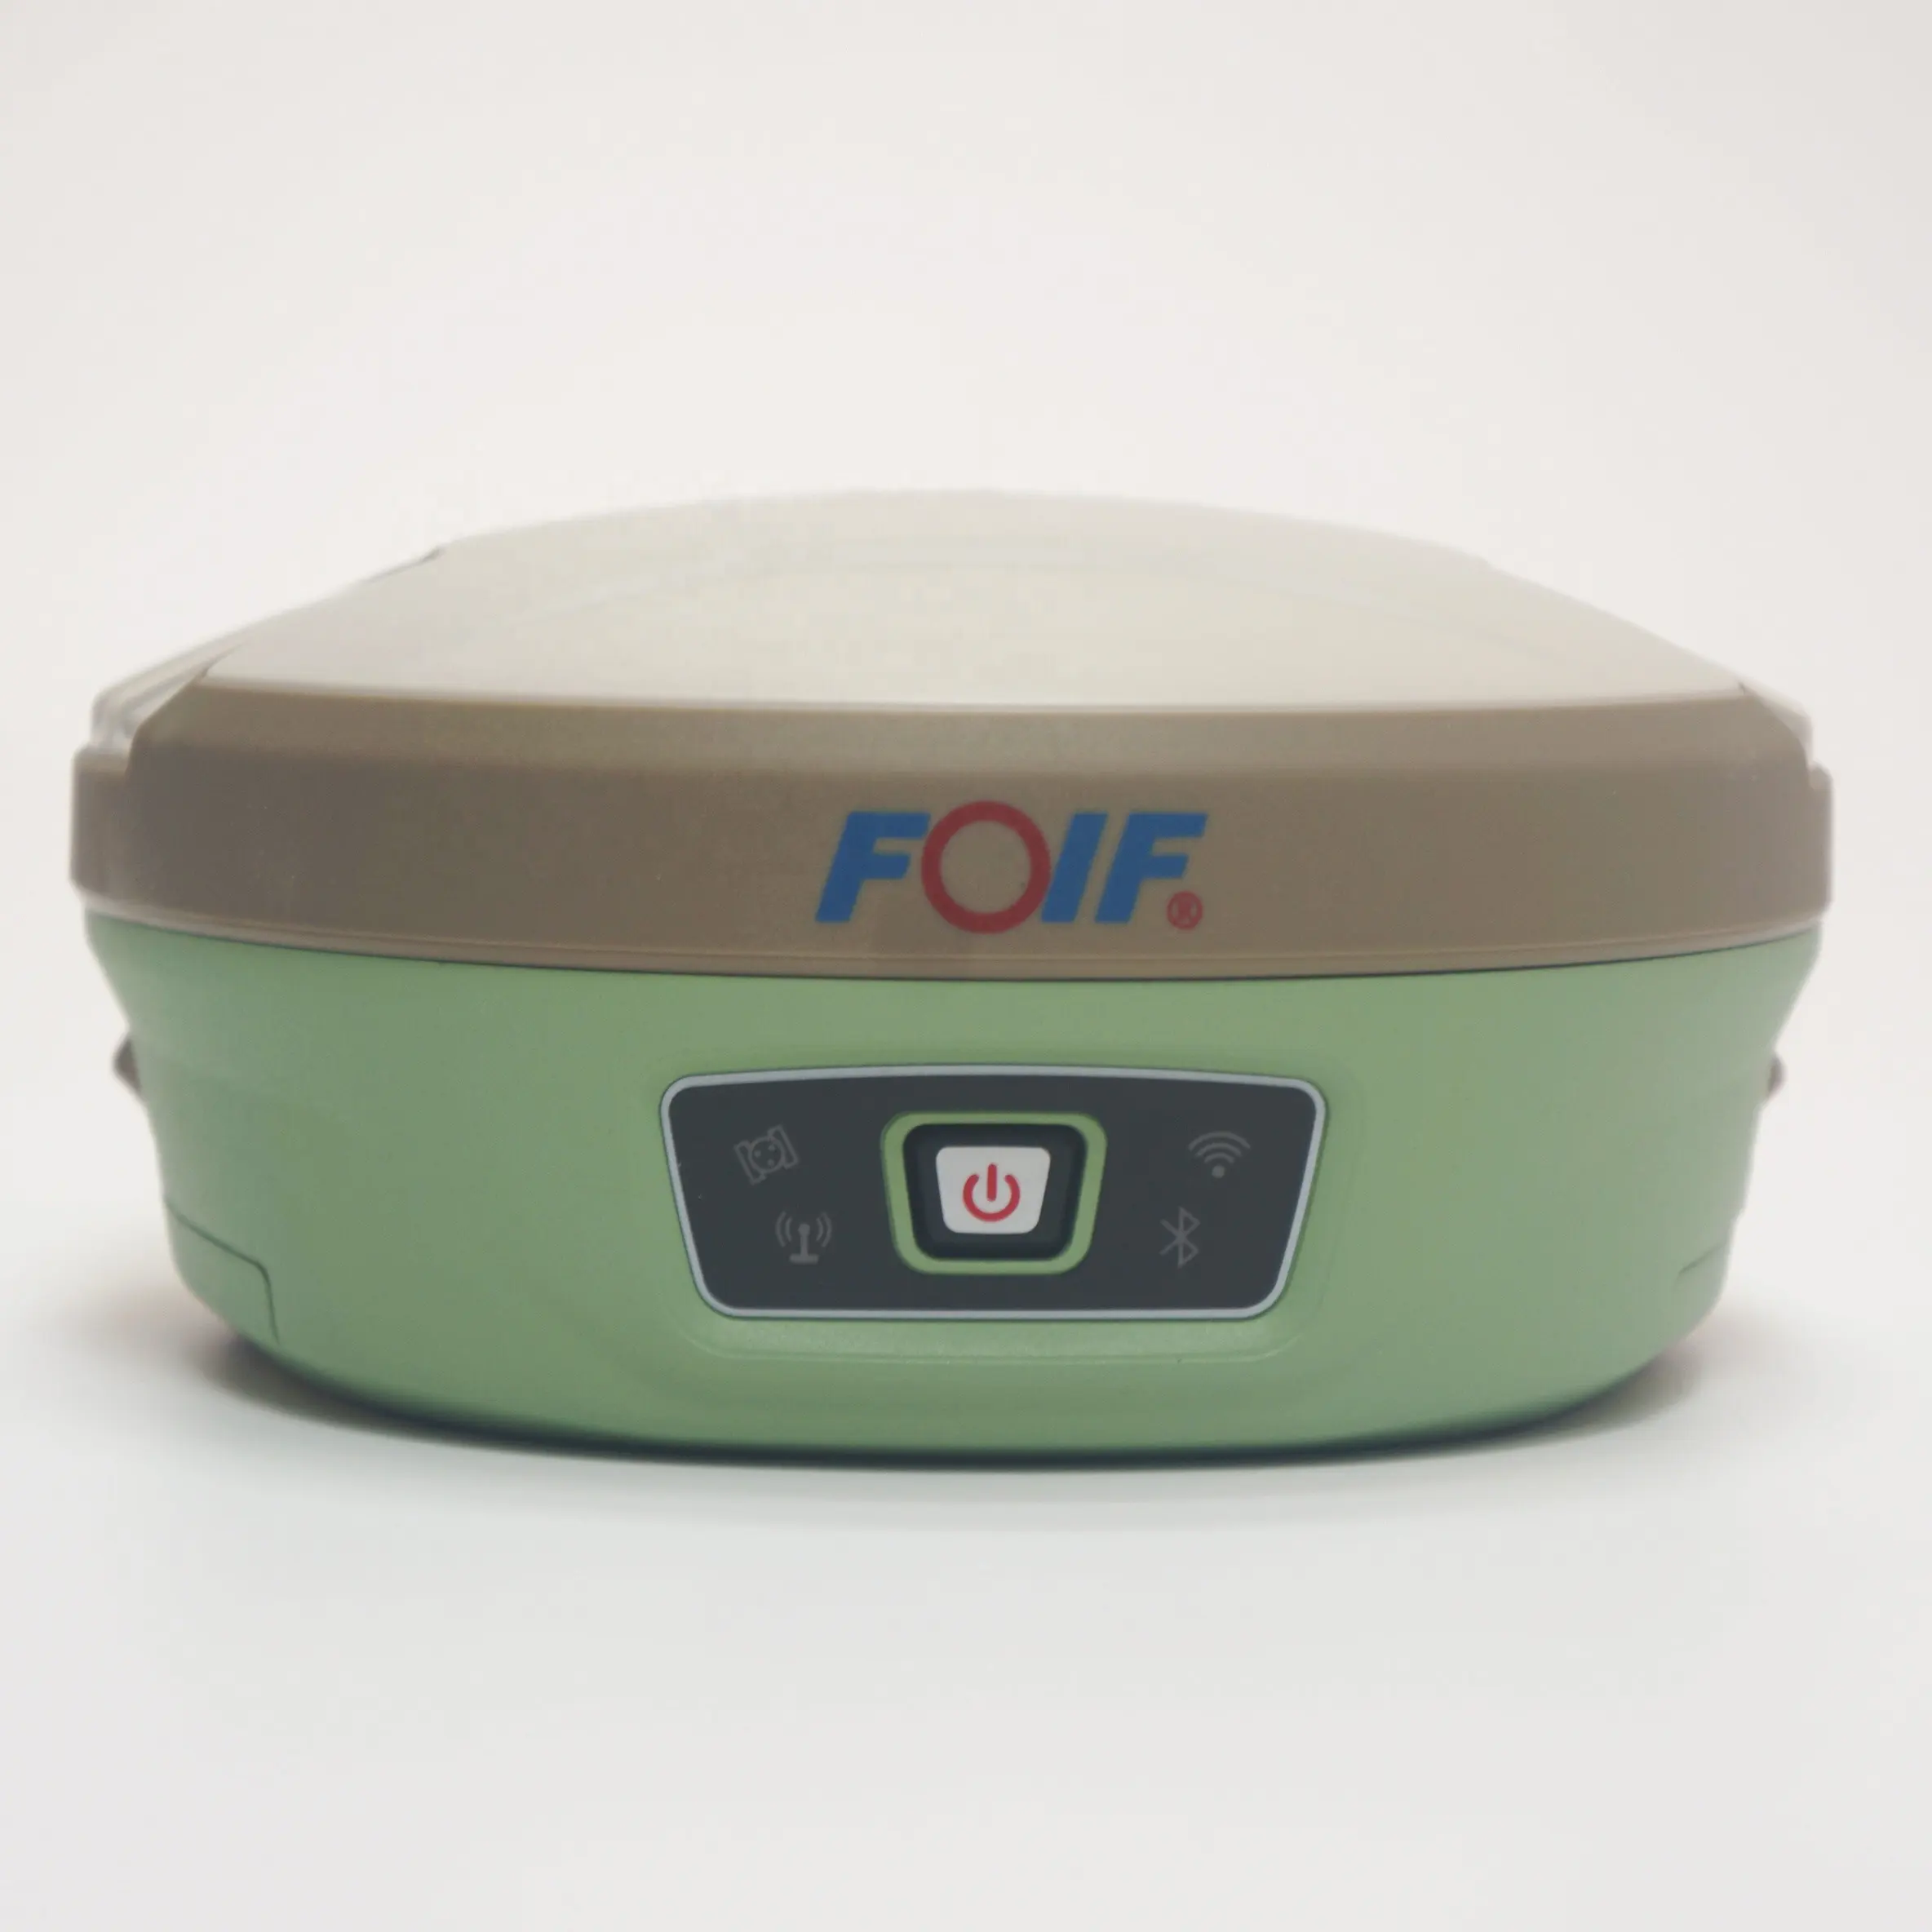 High Precision Gnss GPS Receiver Foif A90 with 800 Channels